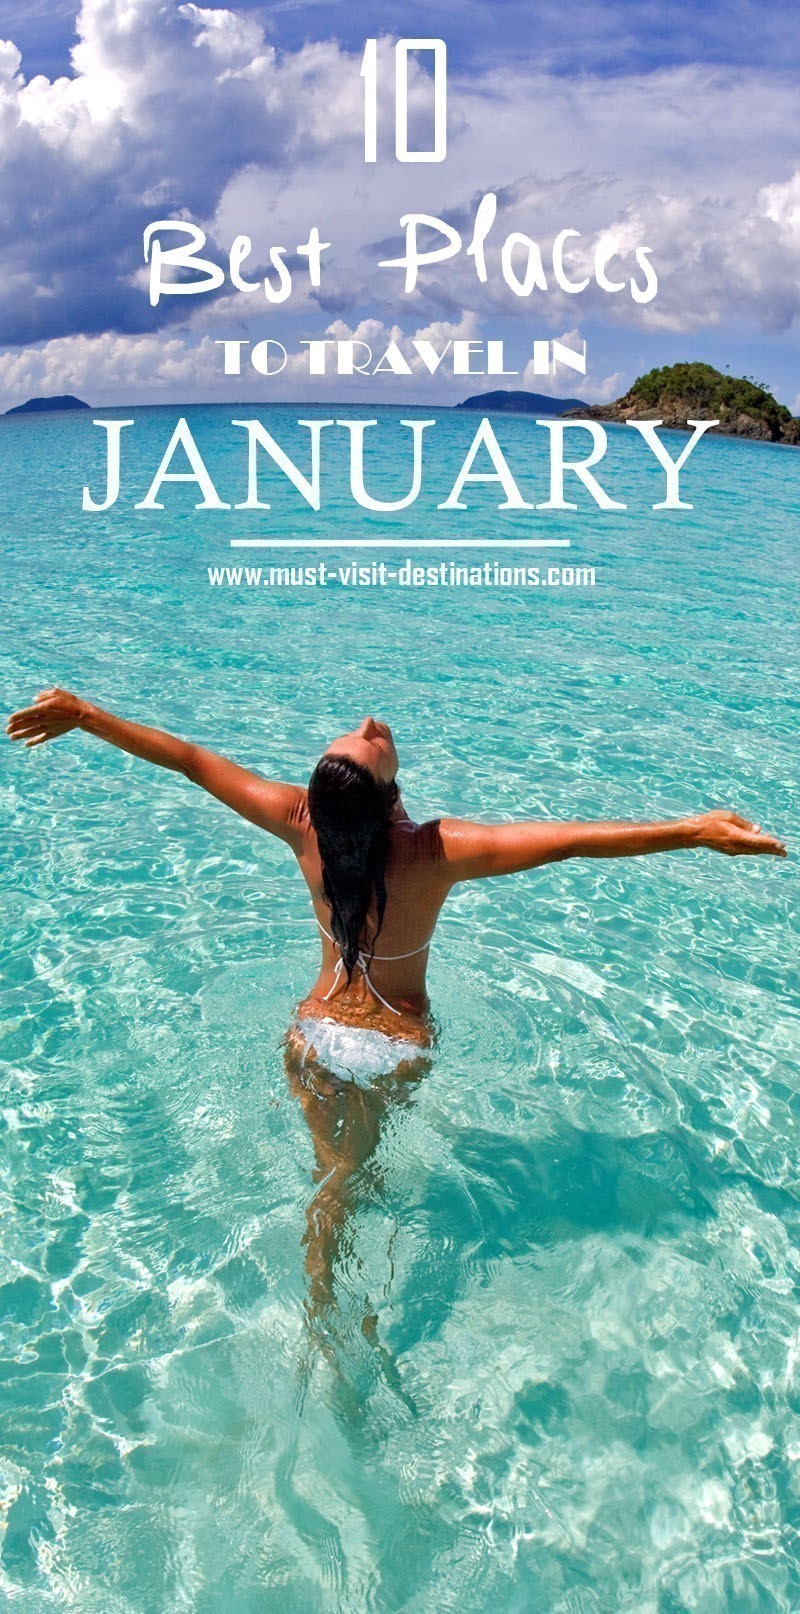 TOP 10 Places To Travel in January #travel #january